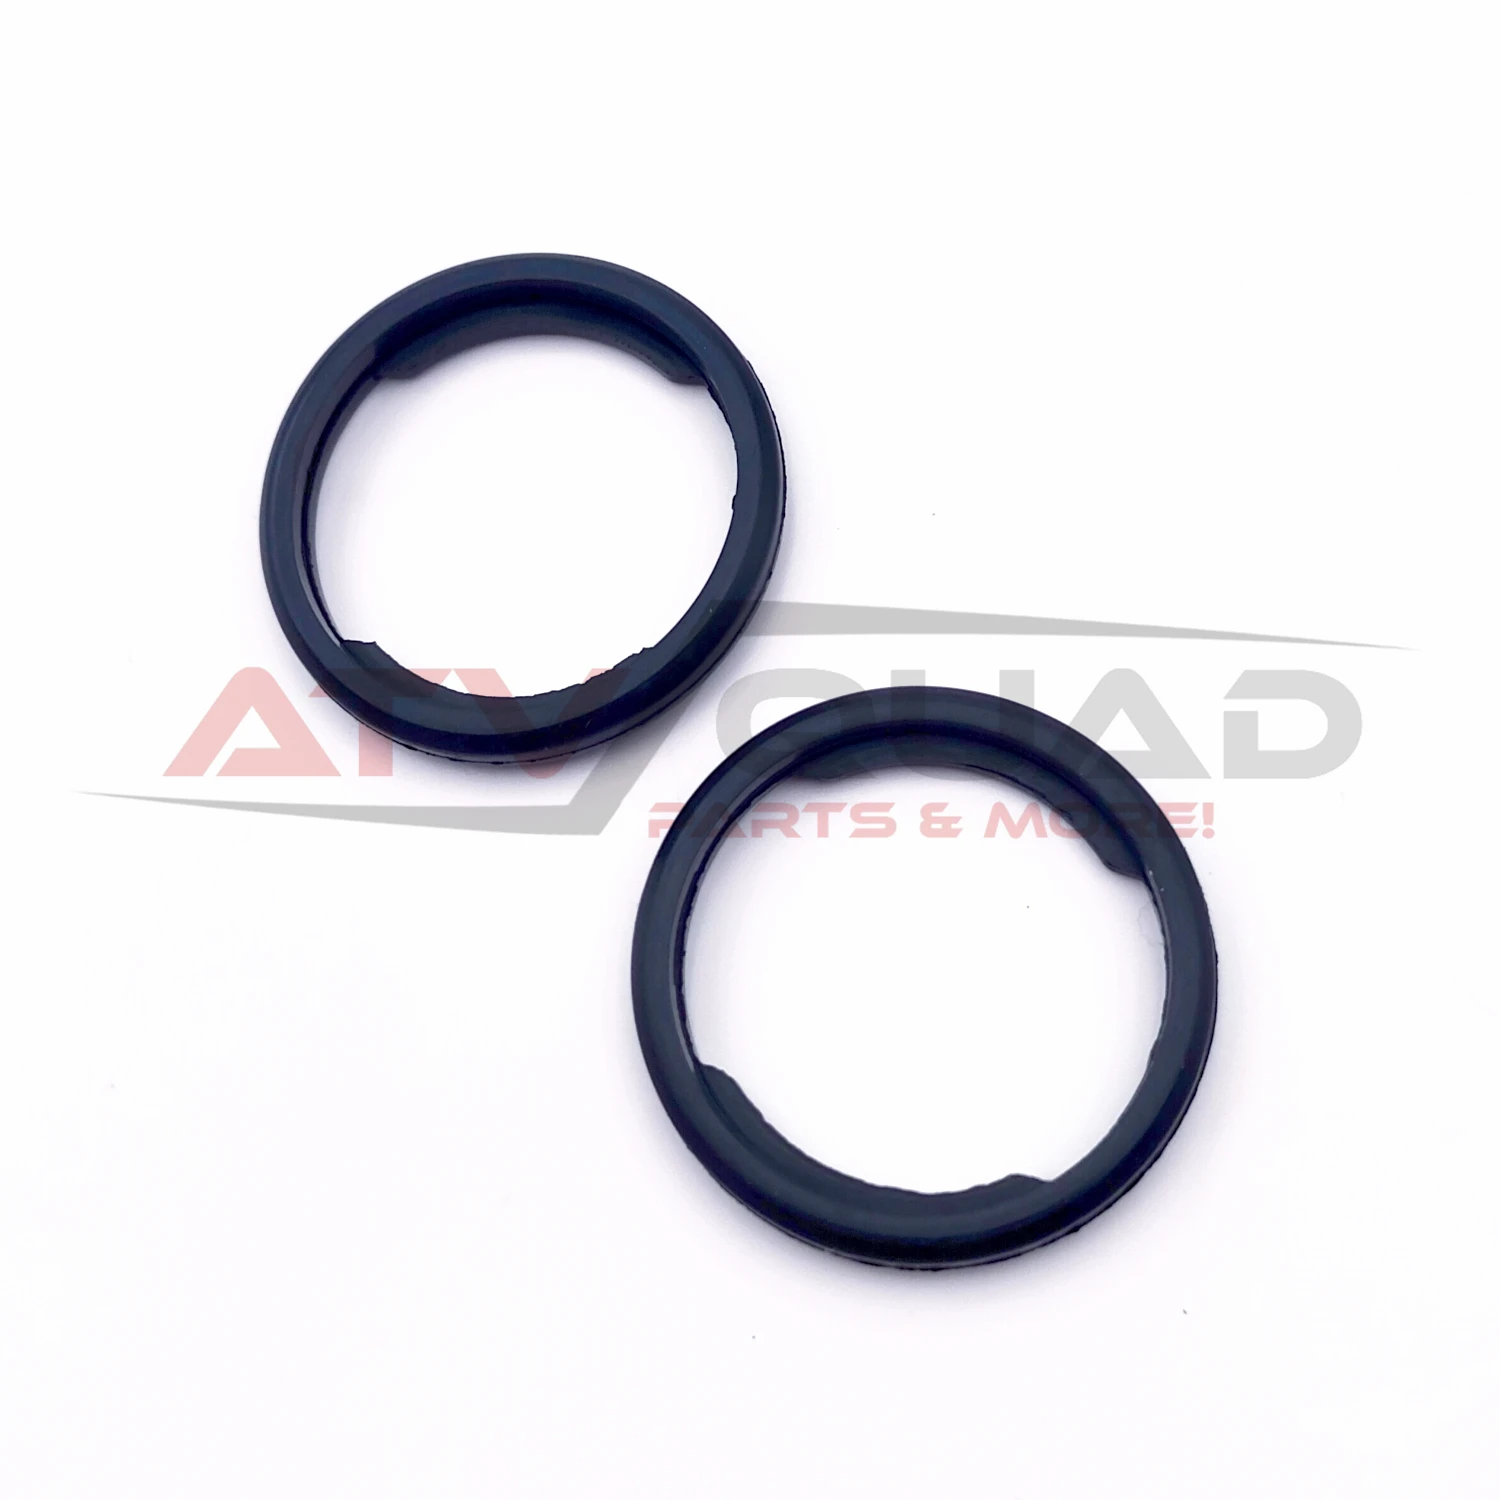 2PCS Thermostat Seal Ring for CFmoto 400 450 500S 520 550 600 Touring 625 800 800EX 800XC 850 X8H.O. 950 950EX 1000 0010-022802 cvt cover seal ring for cfmoto 400 450 191q 500s 520 x5h o 500ho 550 x550 u550 z550 191r 600 touring 625 u600 191s 0gr0 013003